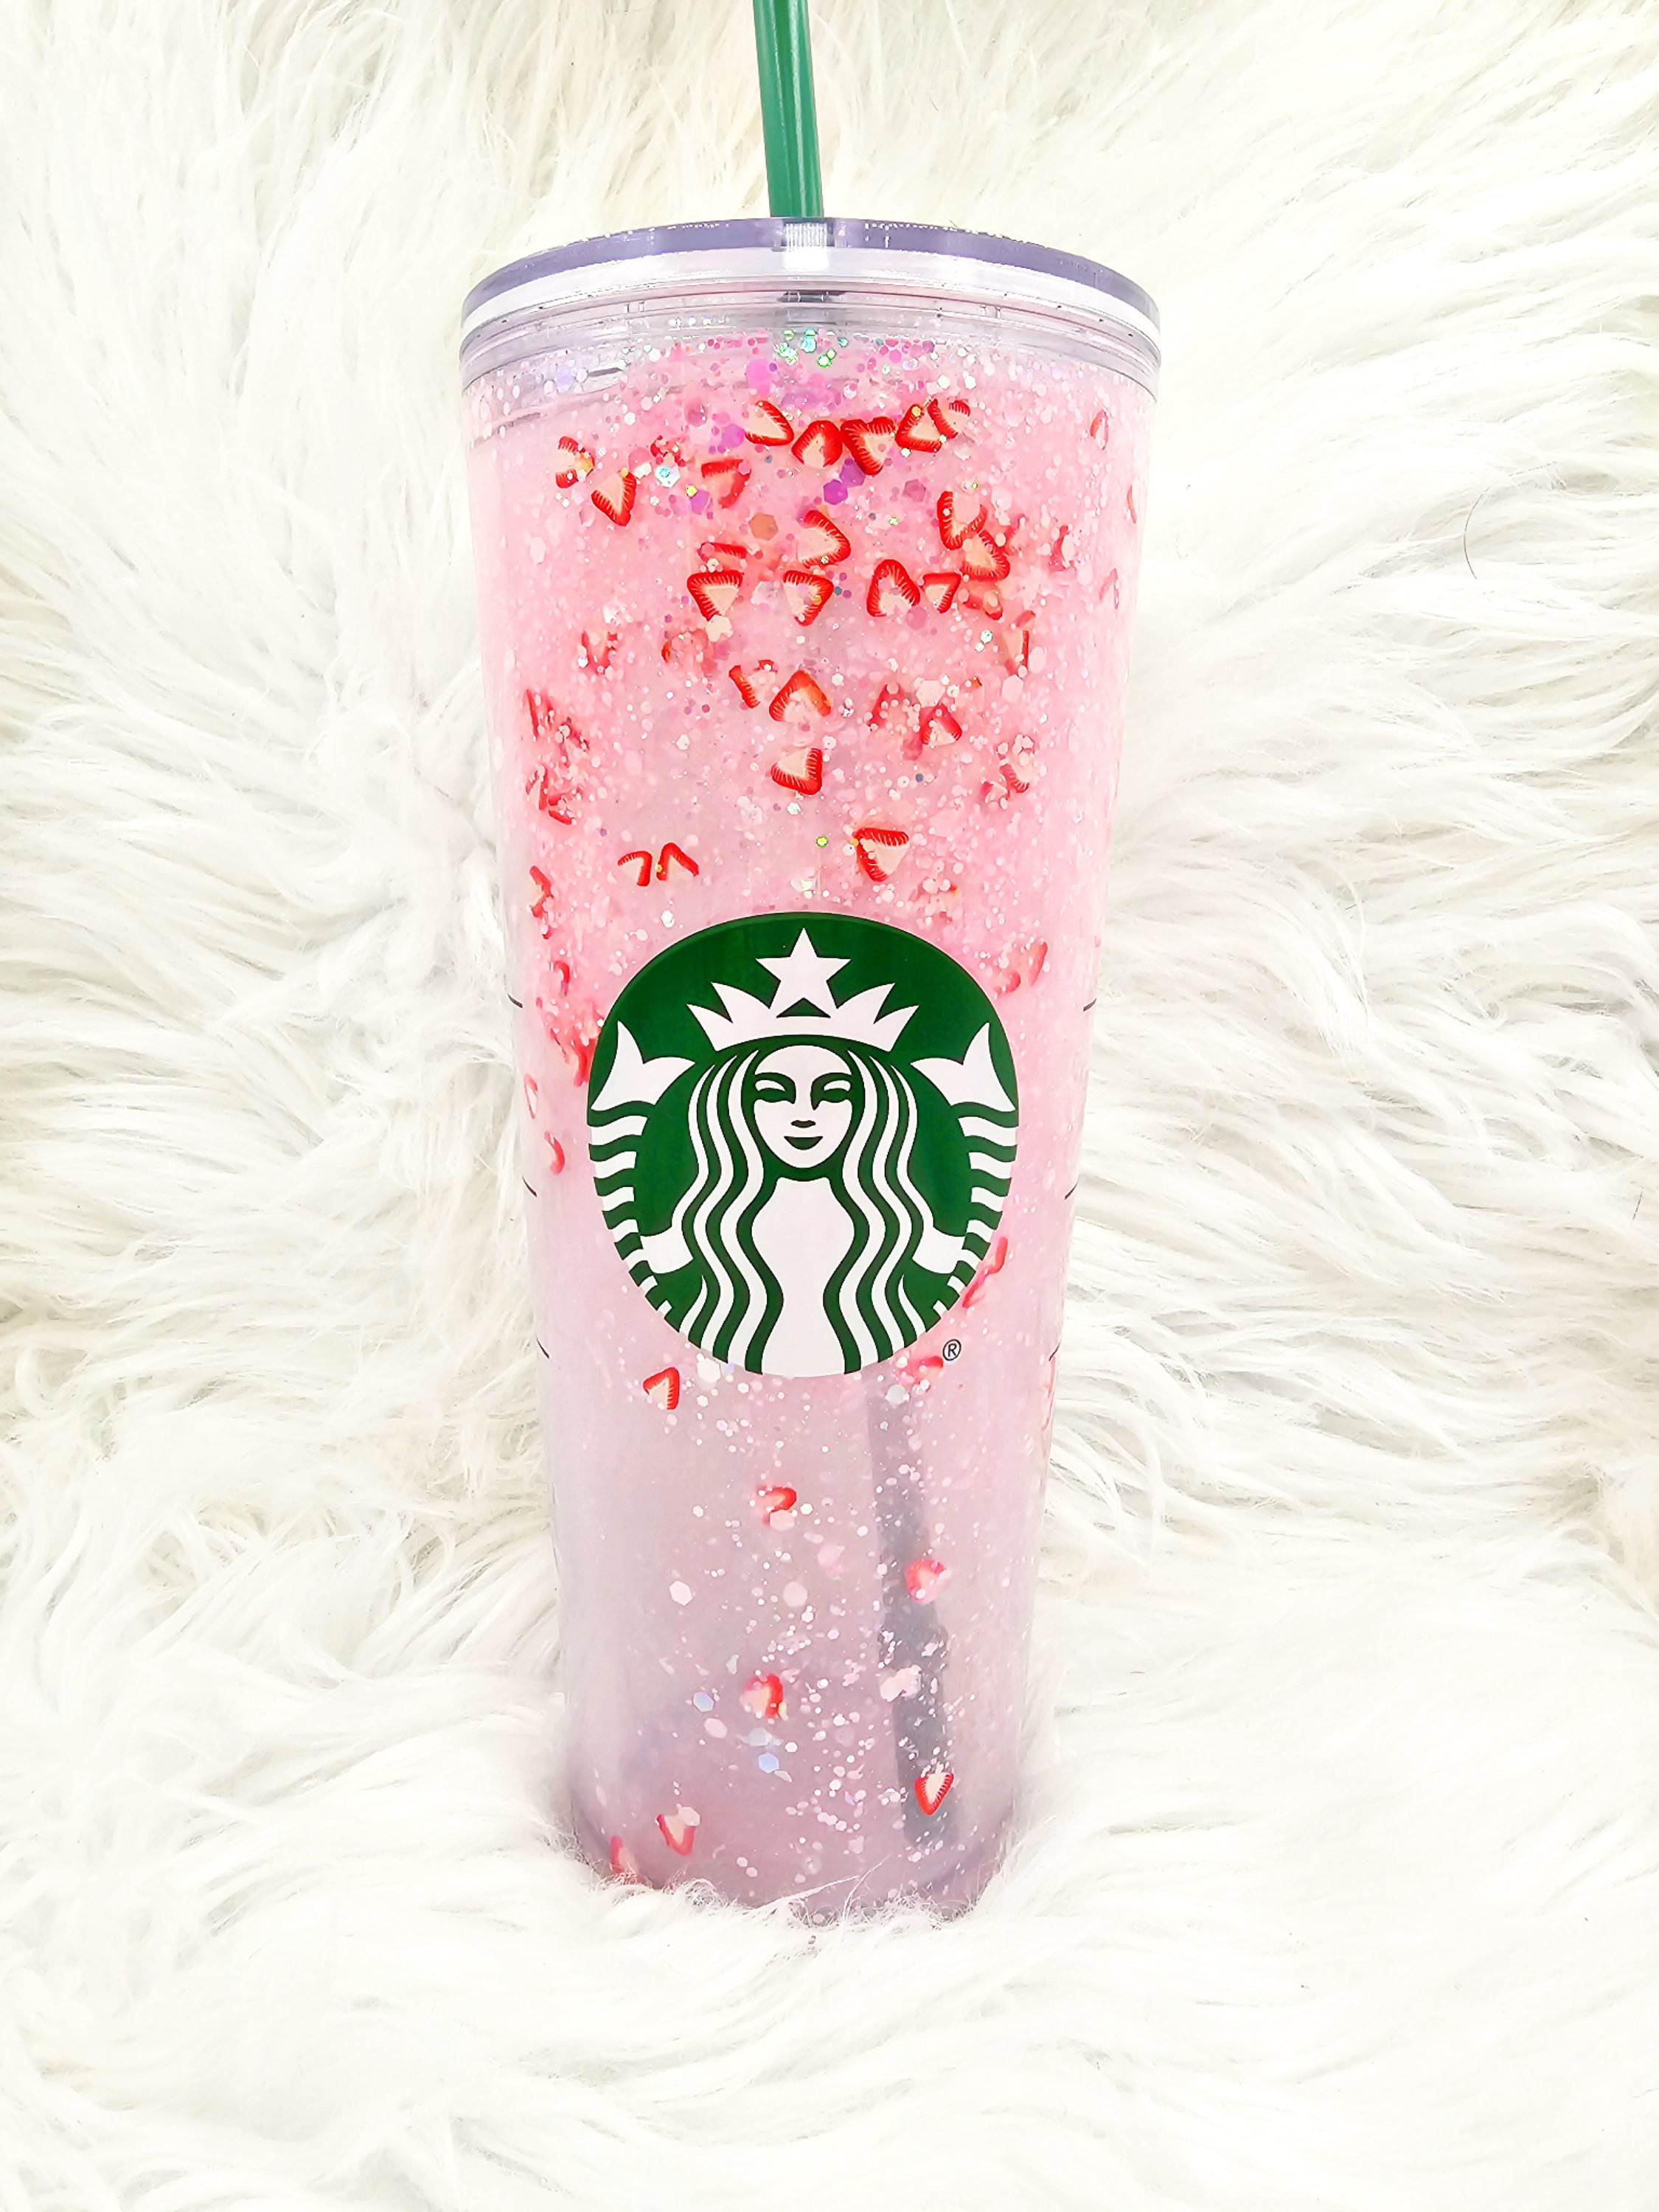 Miniature Starbucks Cup Strawberry Pink Drink/car Accessories